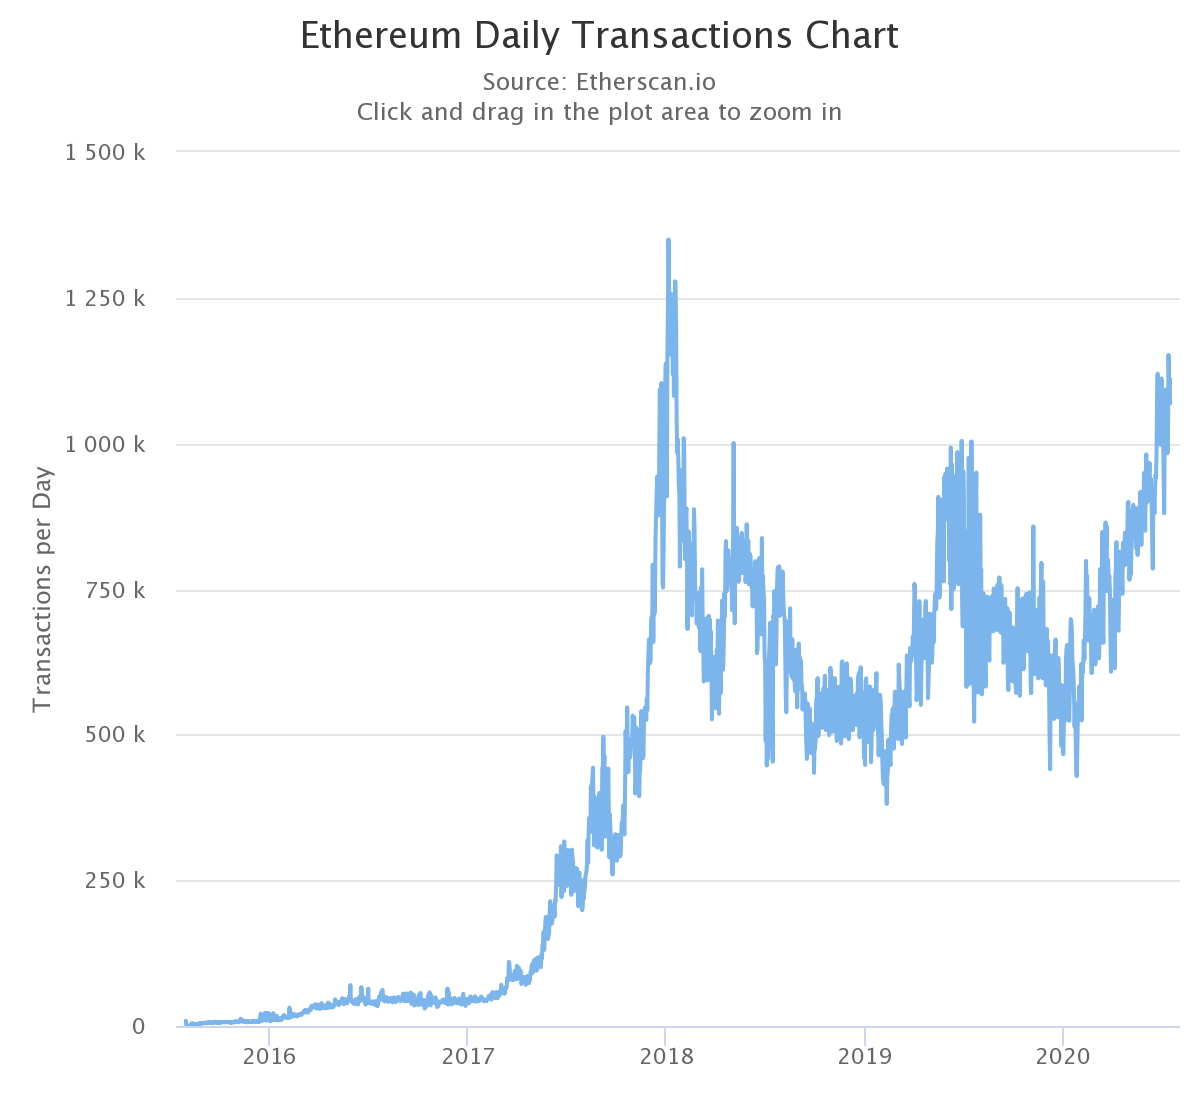 Ethereum daily transactions chart. Source: Etherscan